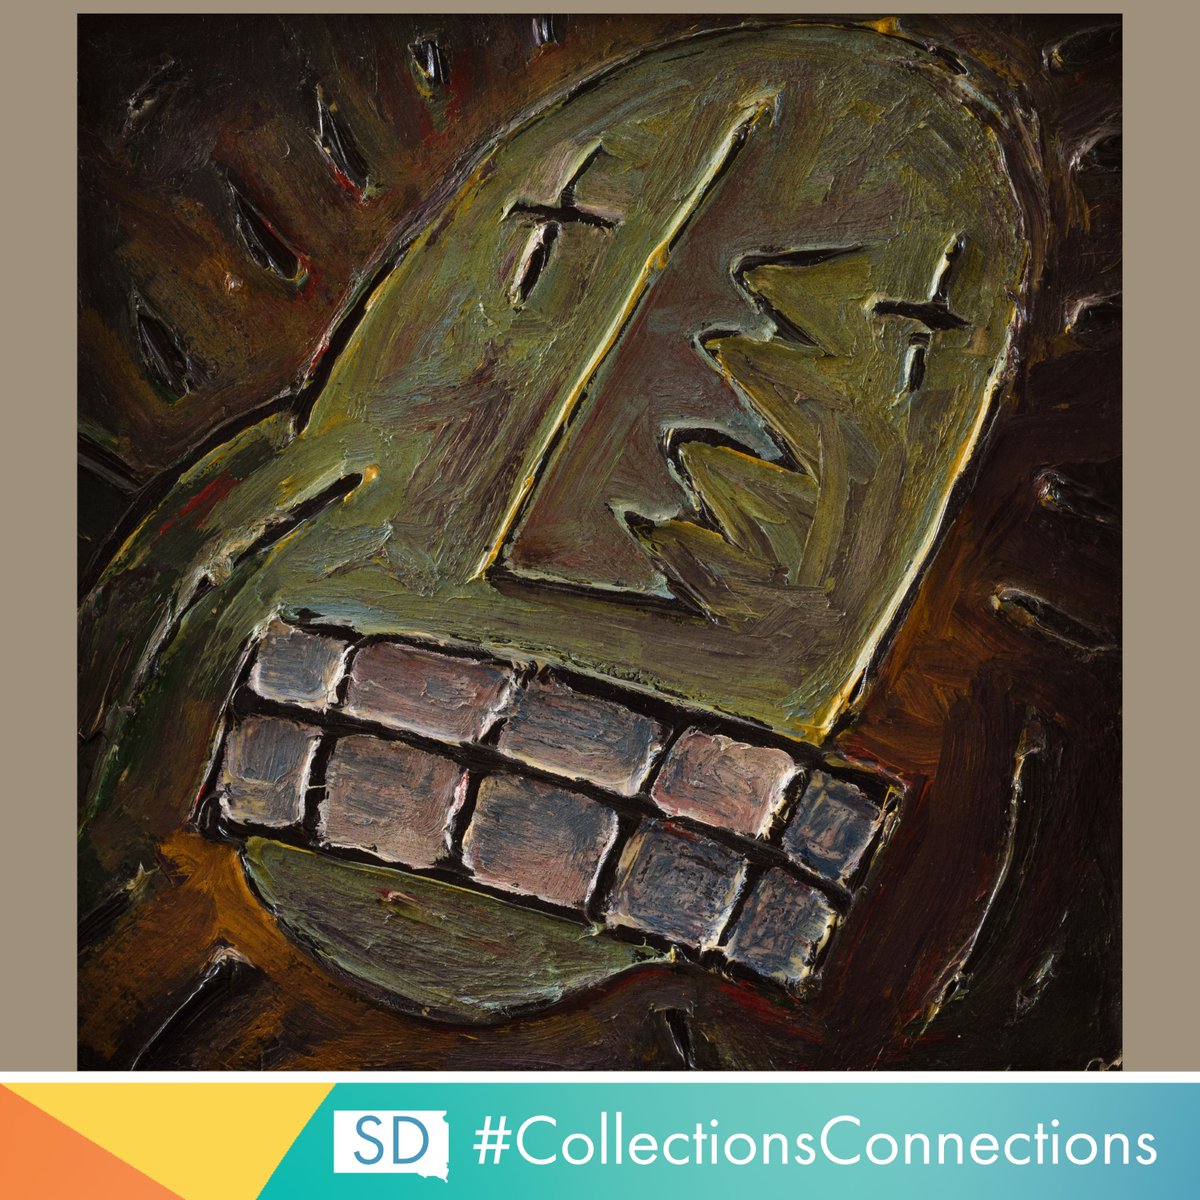 Tim Steele, Professor Emeritus of Graphic Design and former Director of The School of Design at SDSU, found inspiration in house painting. In his art, Steele explores paint and construction to create personal narratives. #CollectionsConnections #stateofcreate